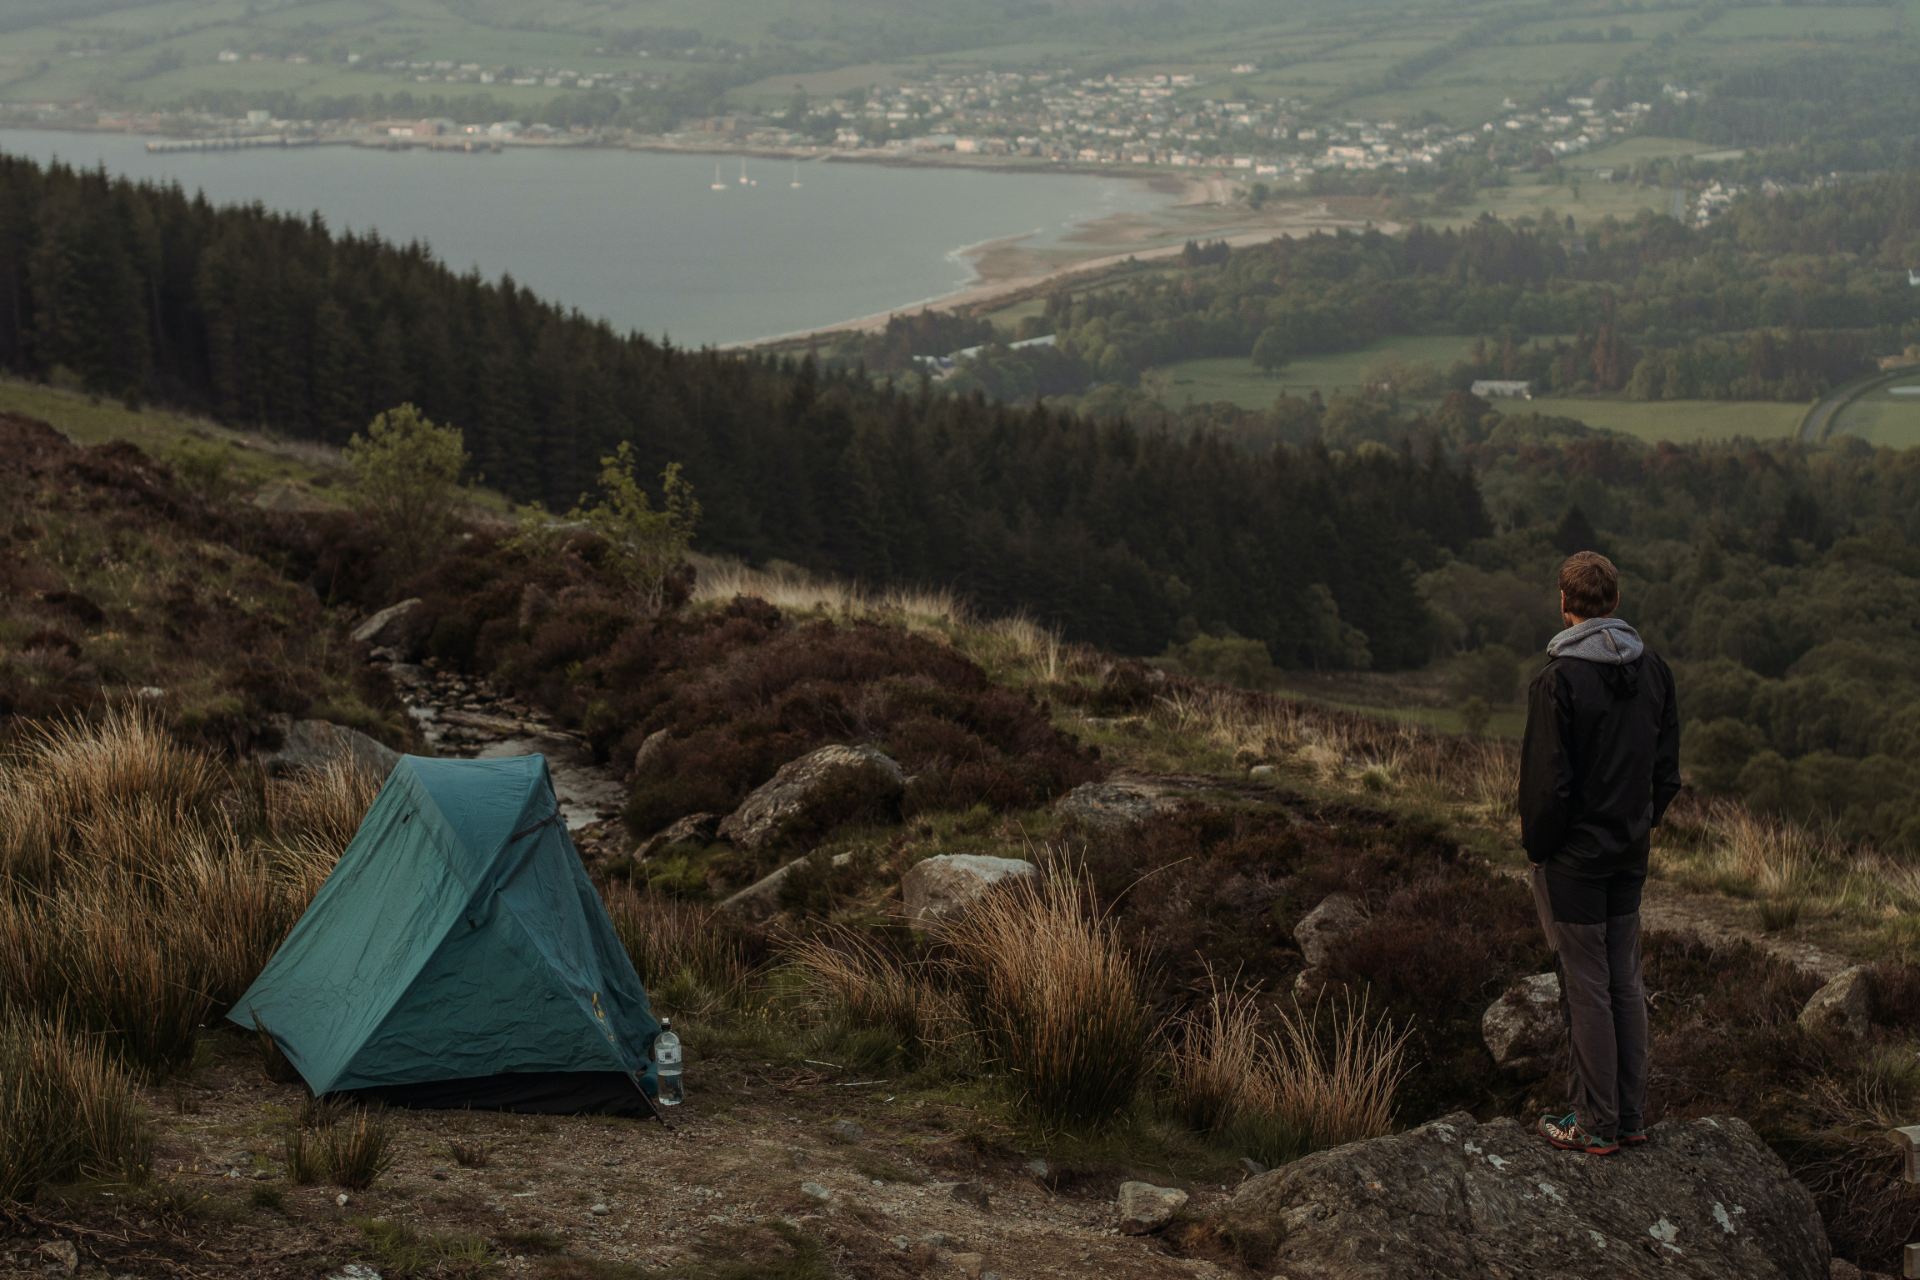 Tent up on the hills, with a man stood watching the view